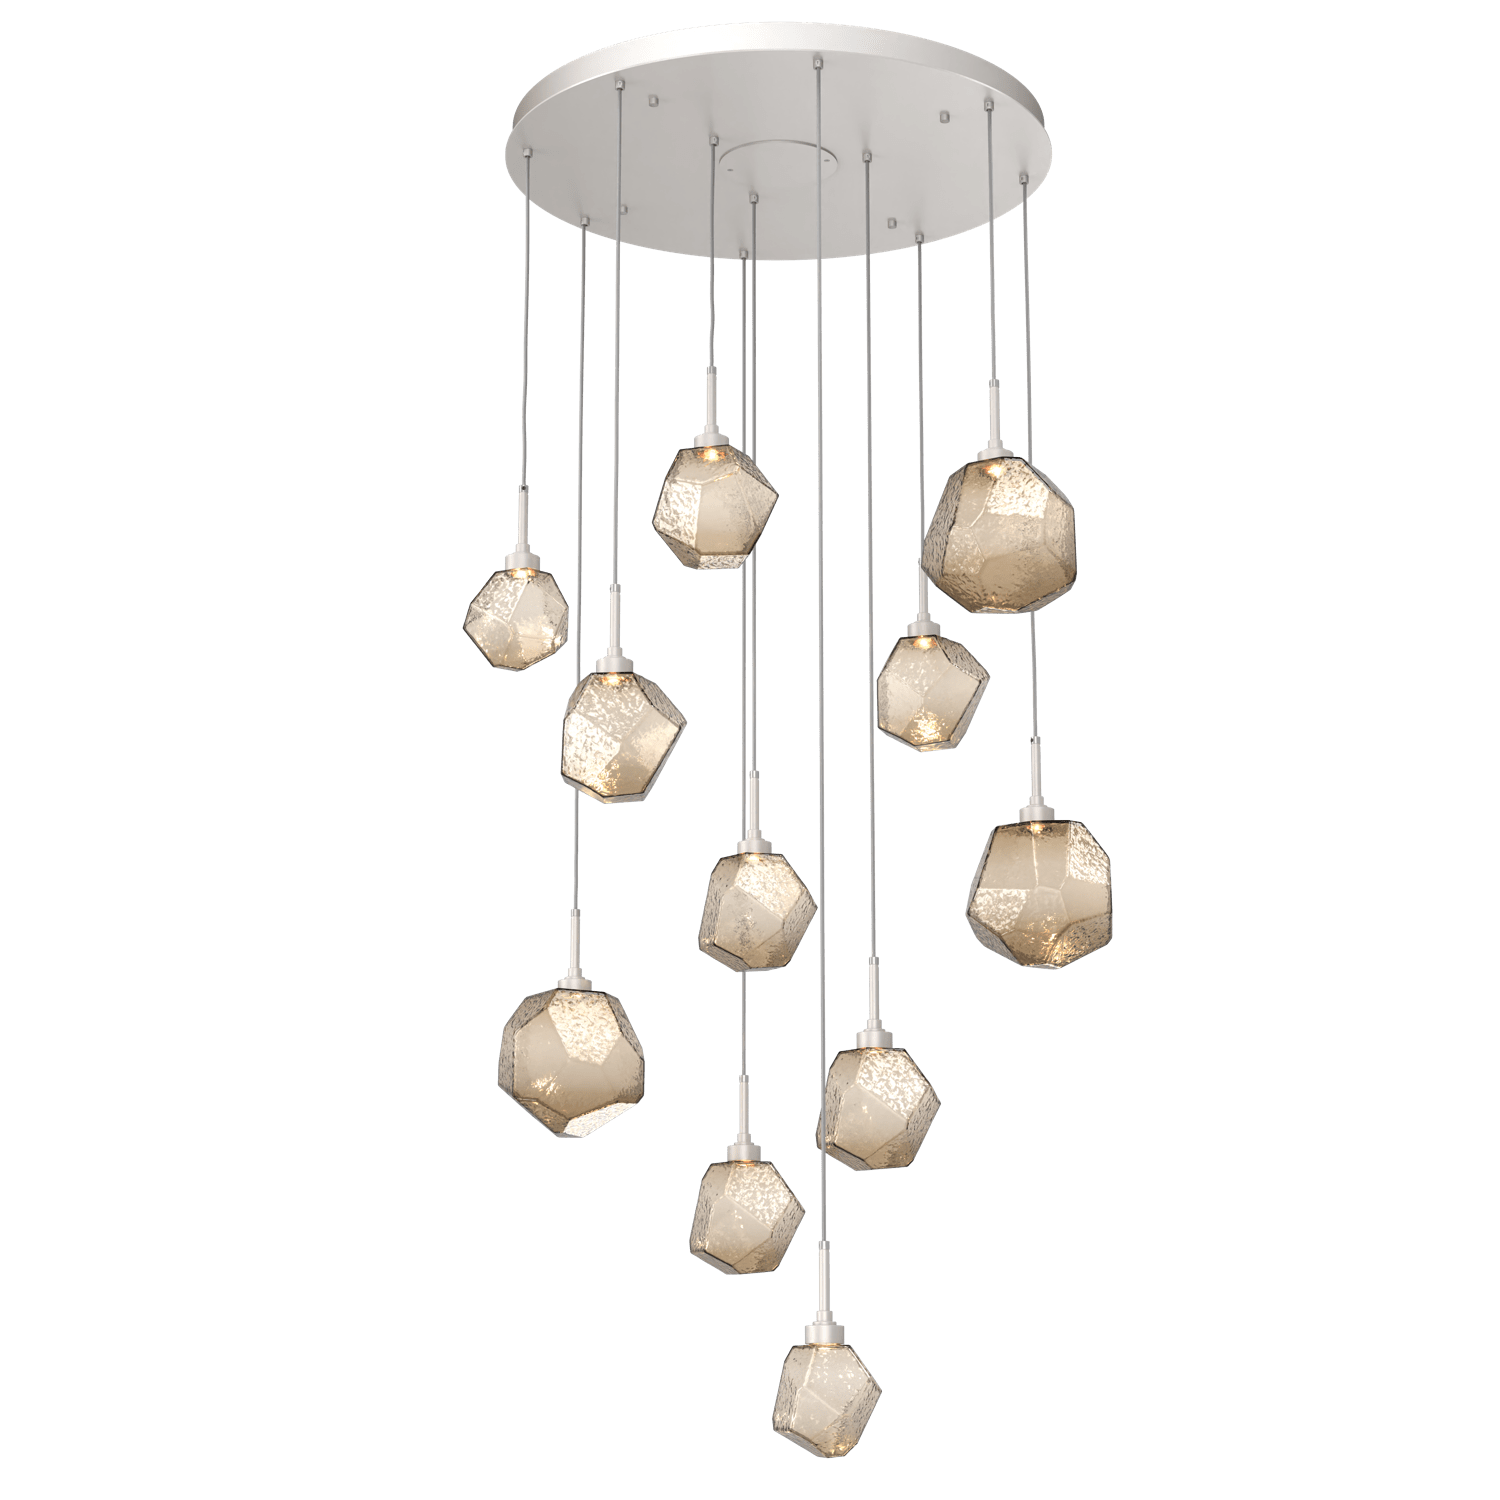 CHB0039-11-BS-B-Hammerton-Studio-Gem-11-light-round-pendant-chandelier-with-metallic-beige-silver-finish-and-bronze-blown-glass-shades-and-LED-lamping